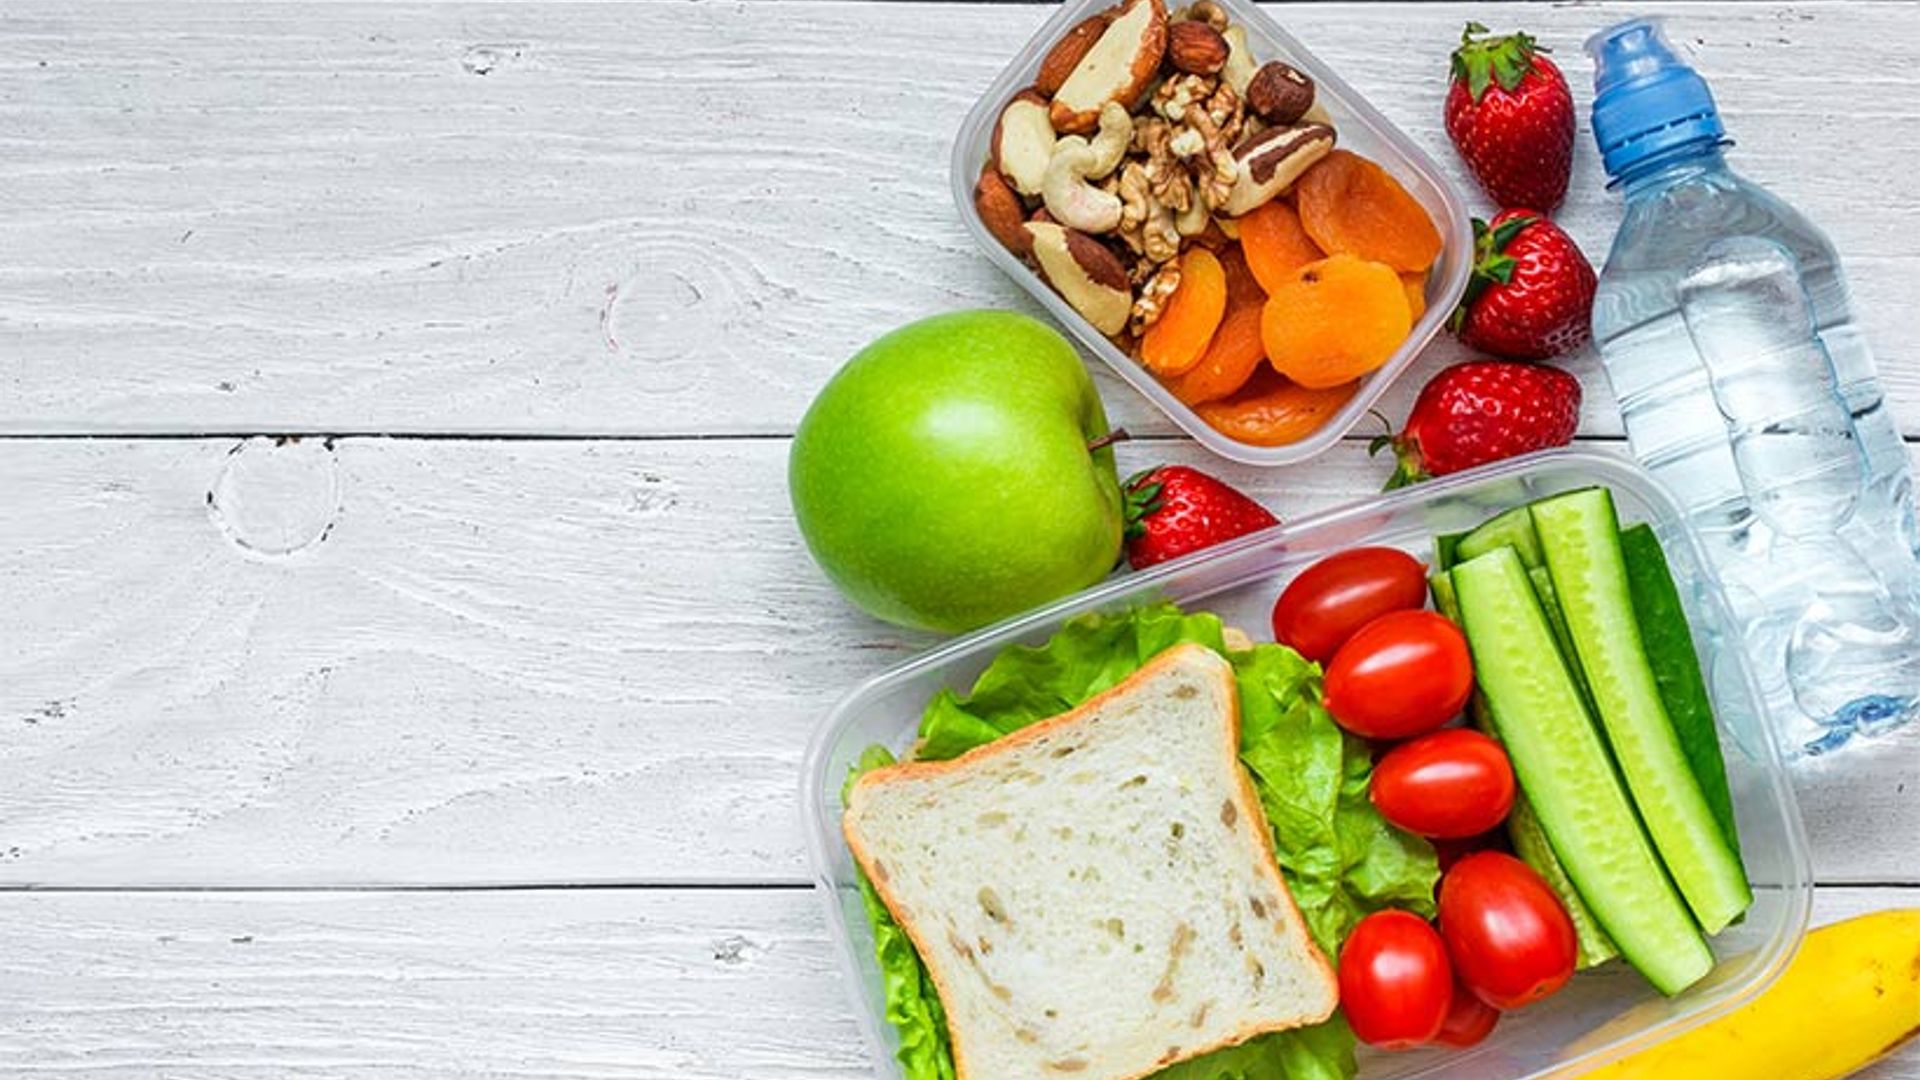 Back To School: 6 simple and healthy snack ideas for your kids' lunchboxes